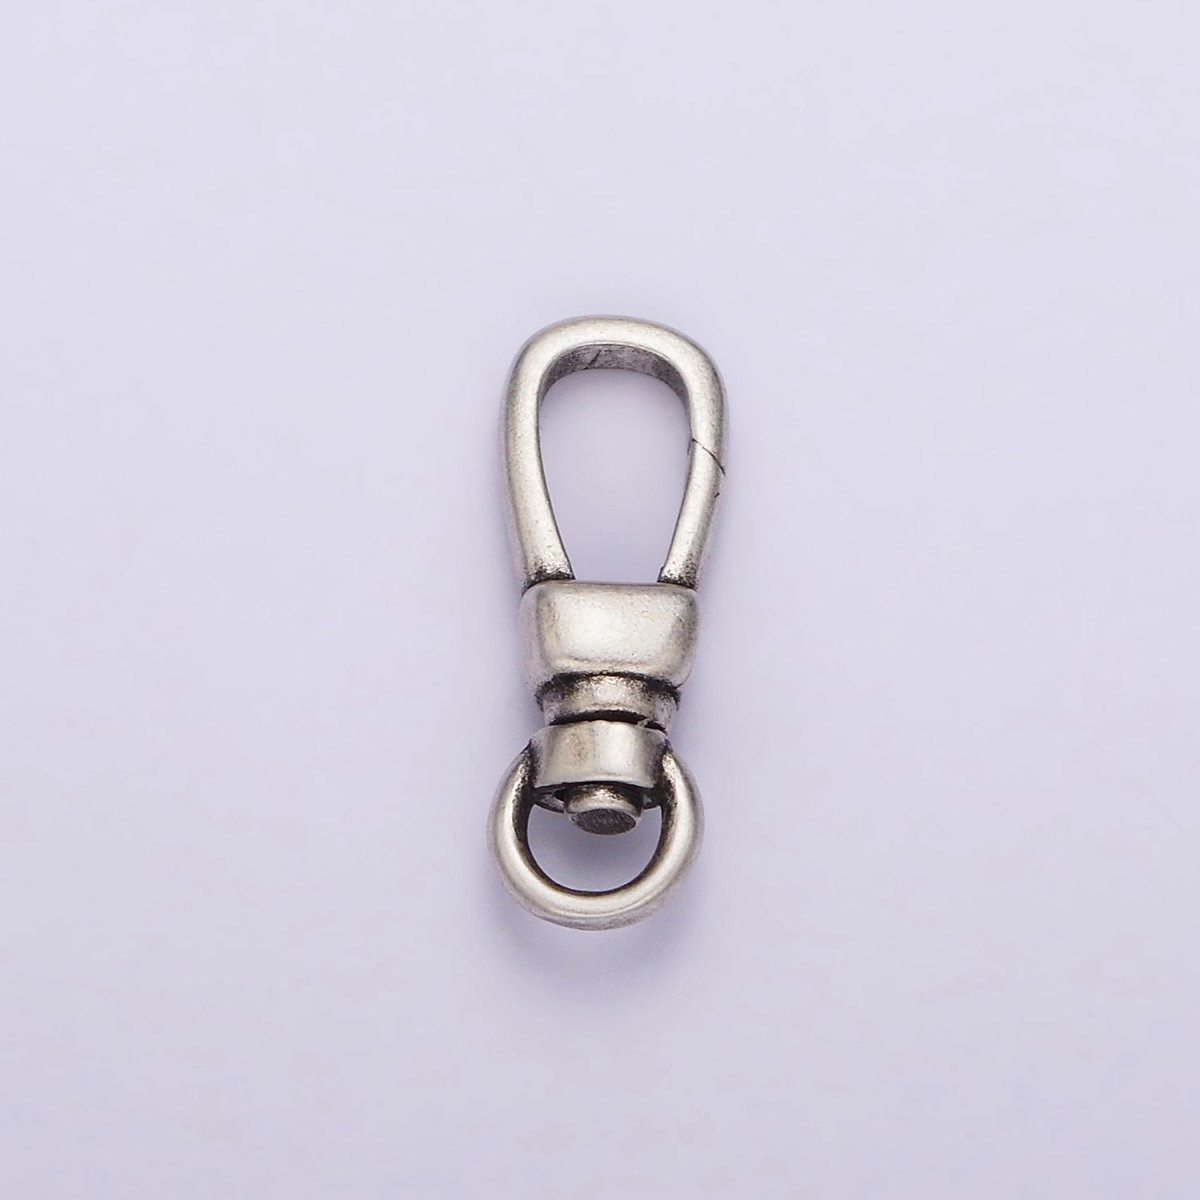 1 Pc 17.3x6.2 mm Sterling Silver Push Lobster Clasp for Jewelry Making SL-313 - DLUXCA